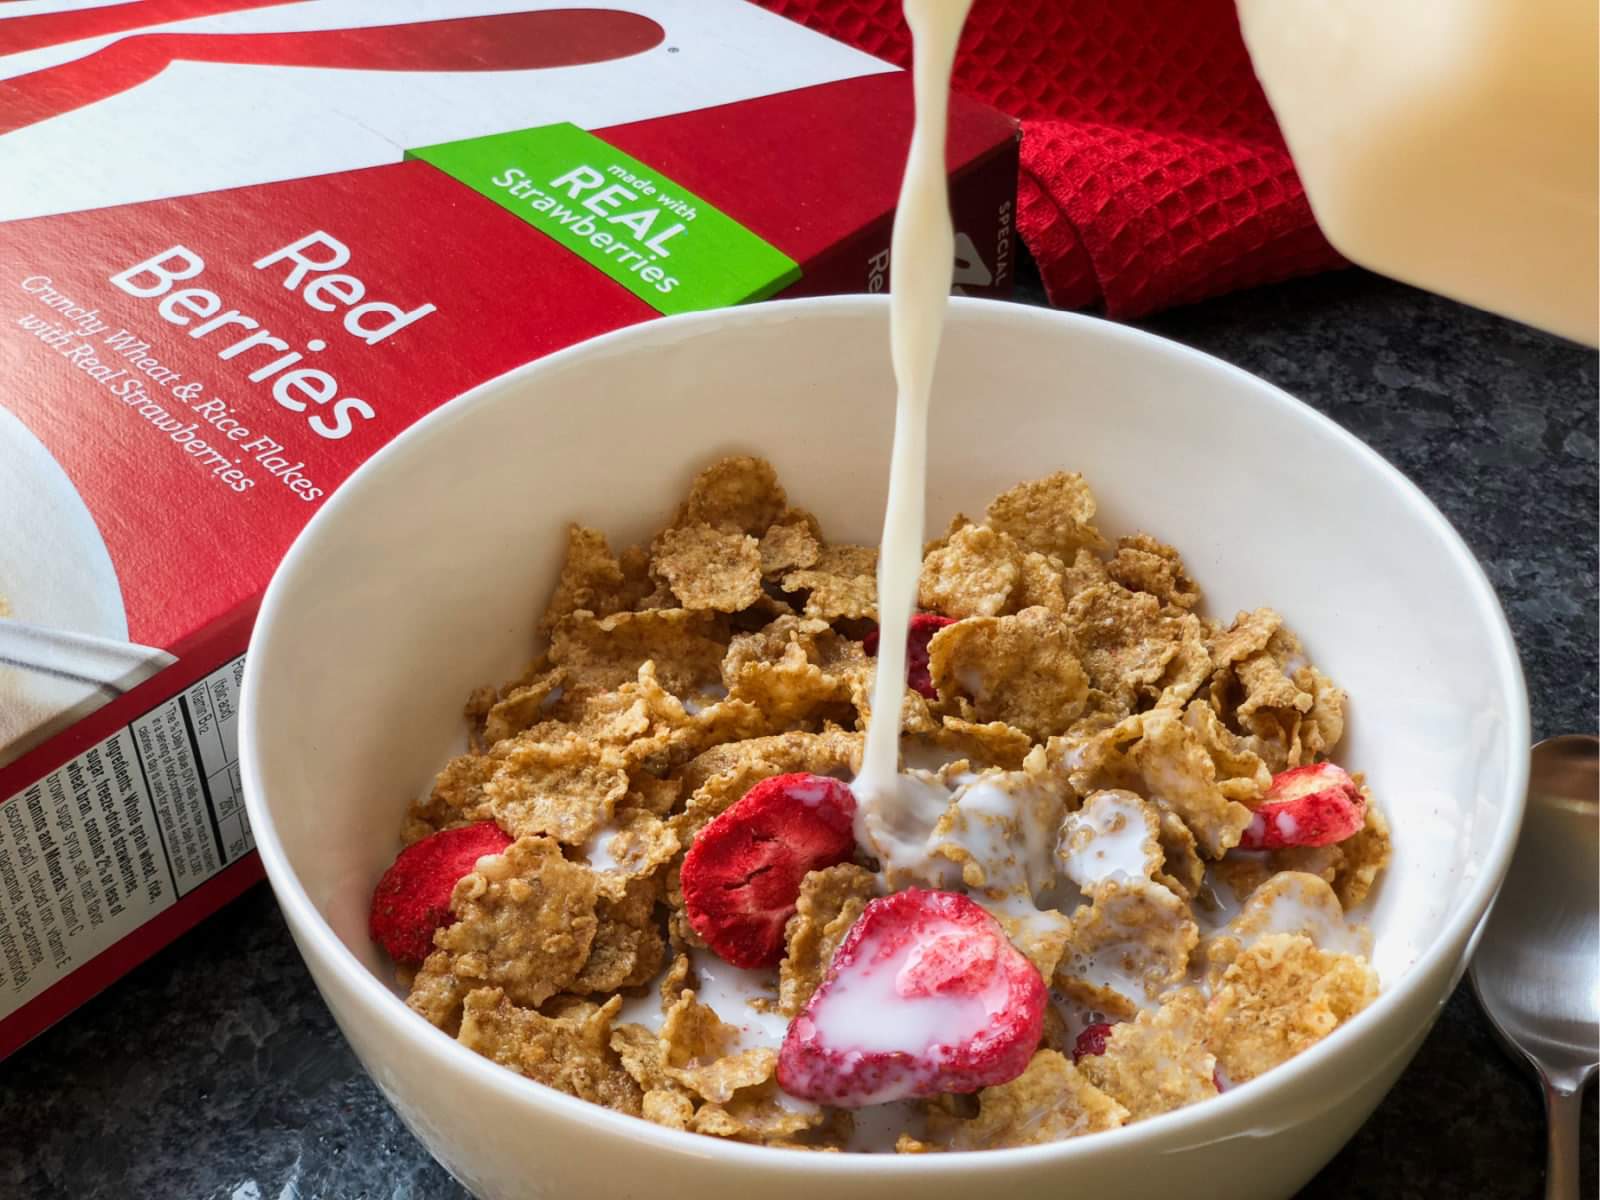 Get The Family Size Boxes Of Kellogg’s Special K Cereal For As Low As $2.07 At Publix